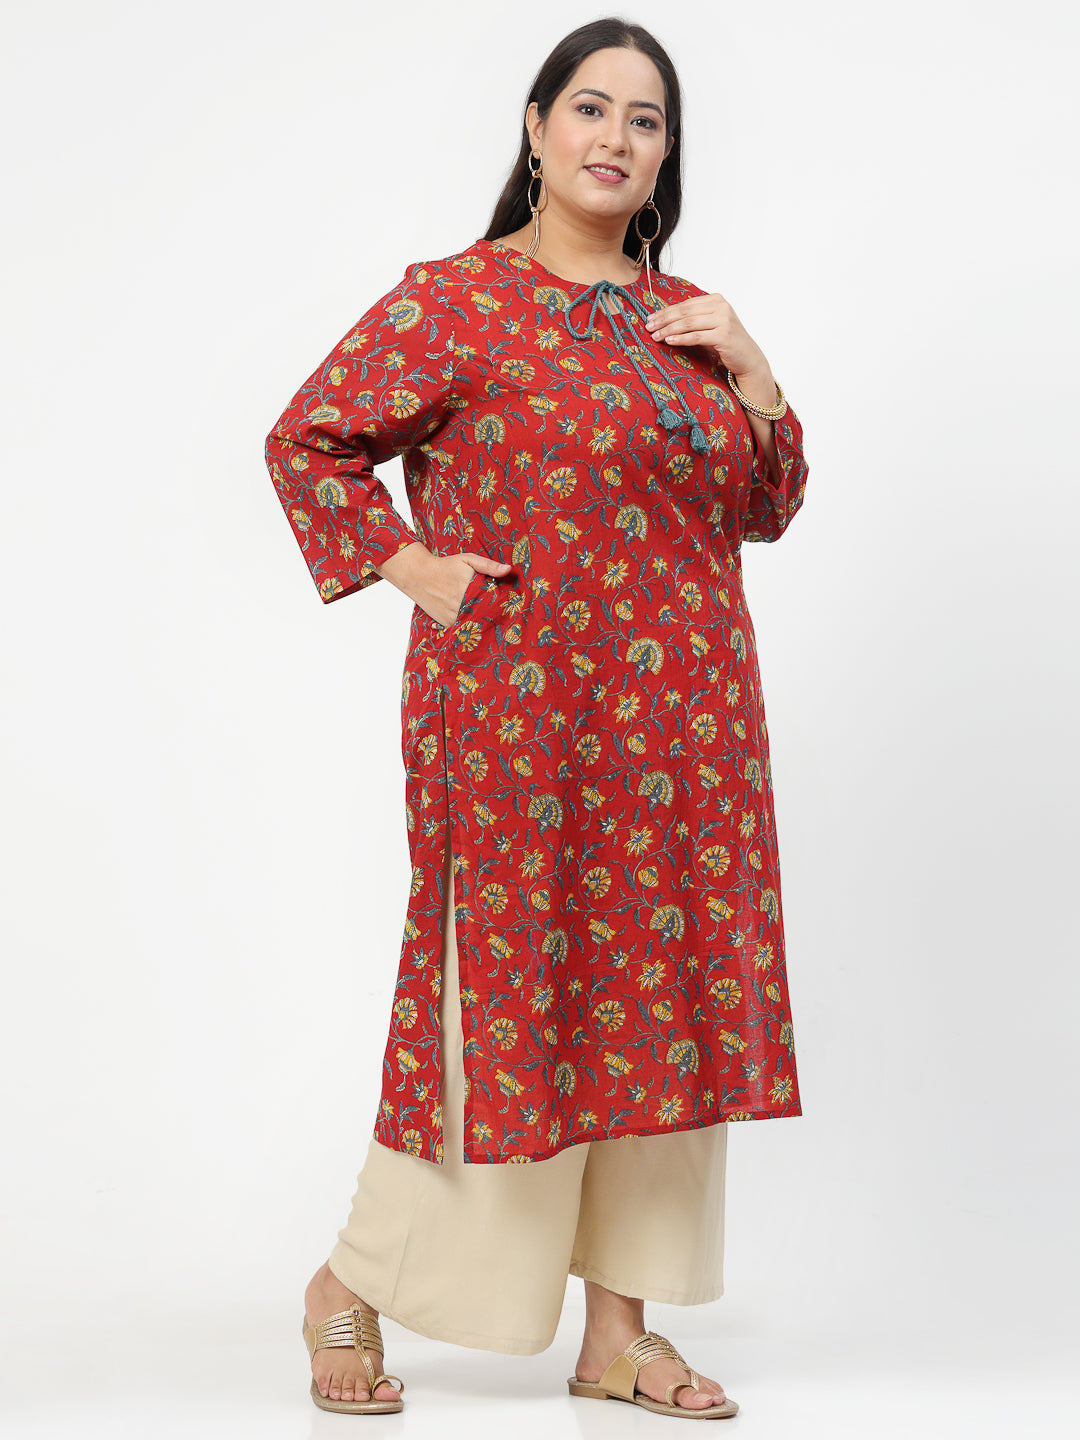 Women Plus Size Red Floral Printed Tie-Up Neck Kurta - Kashyap Global Lifestyles LLP